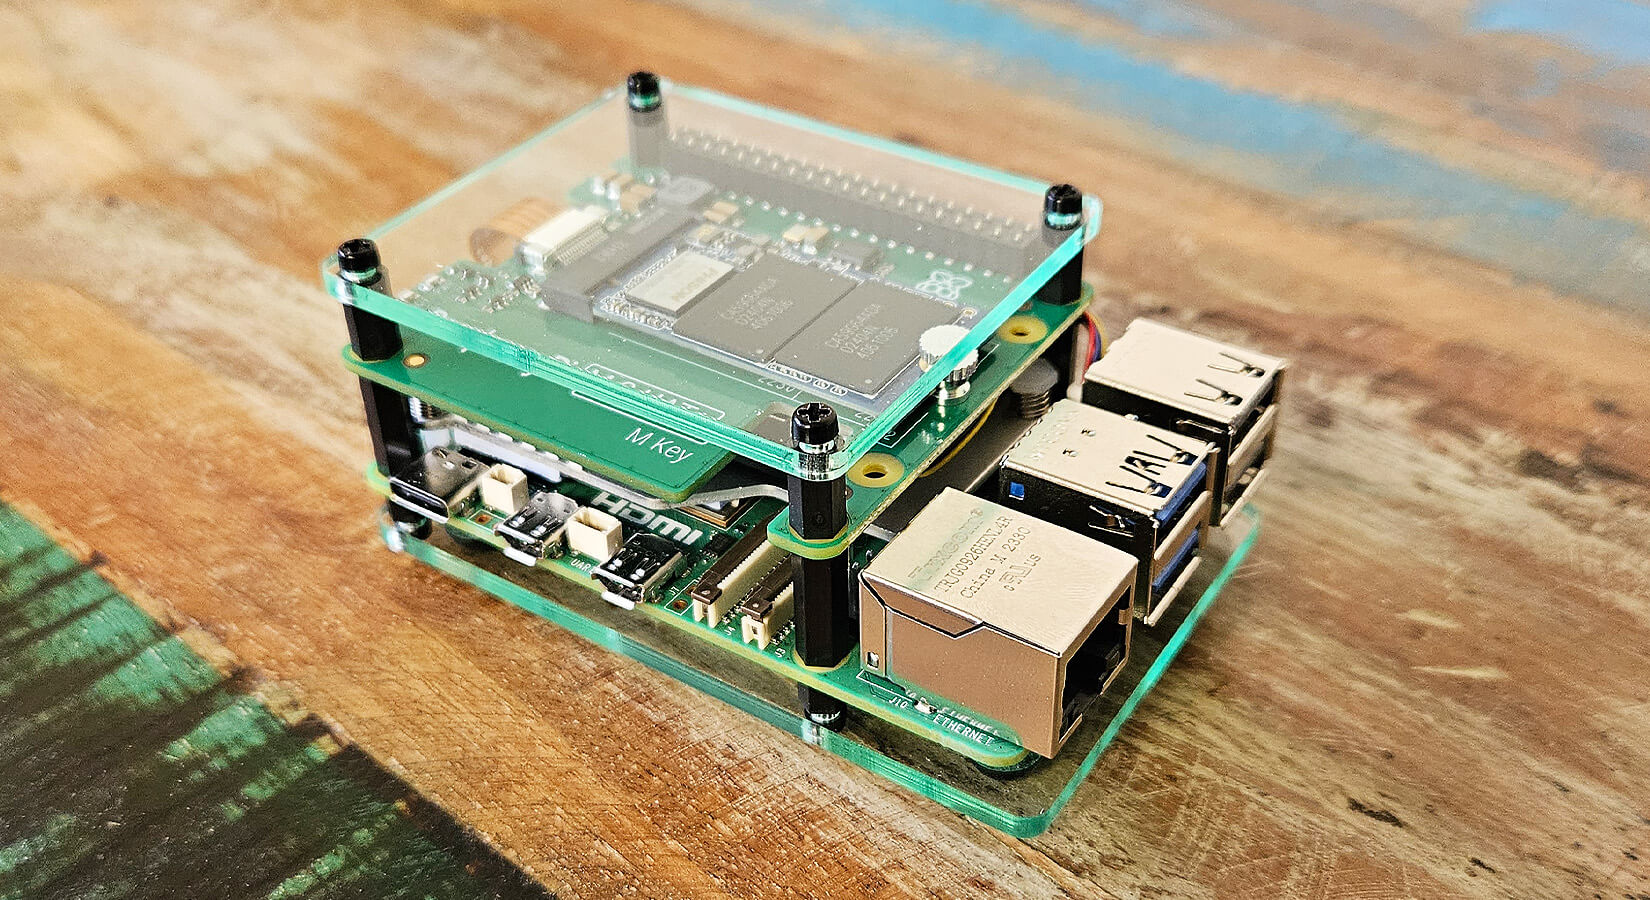 Assembly Guide for the Raspberry Pi M.2 HAT+ Layer Case